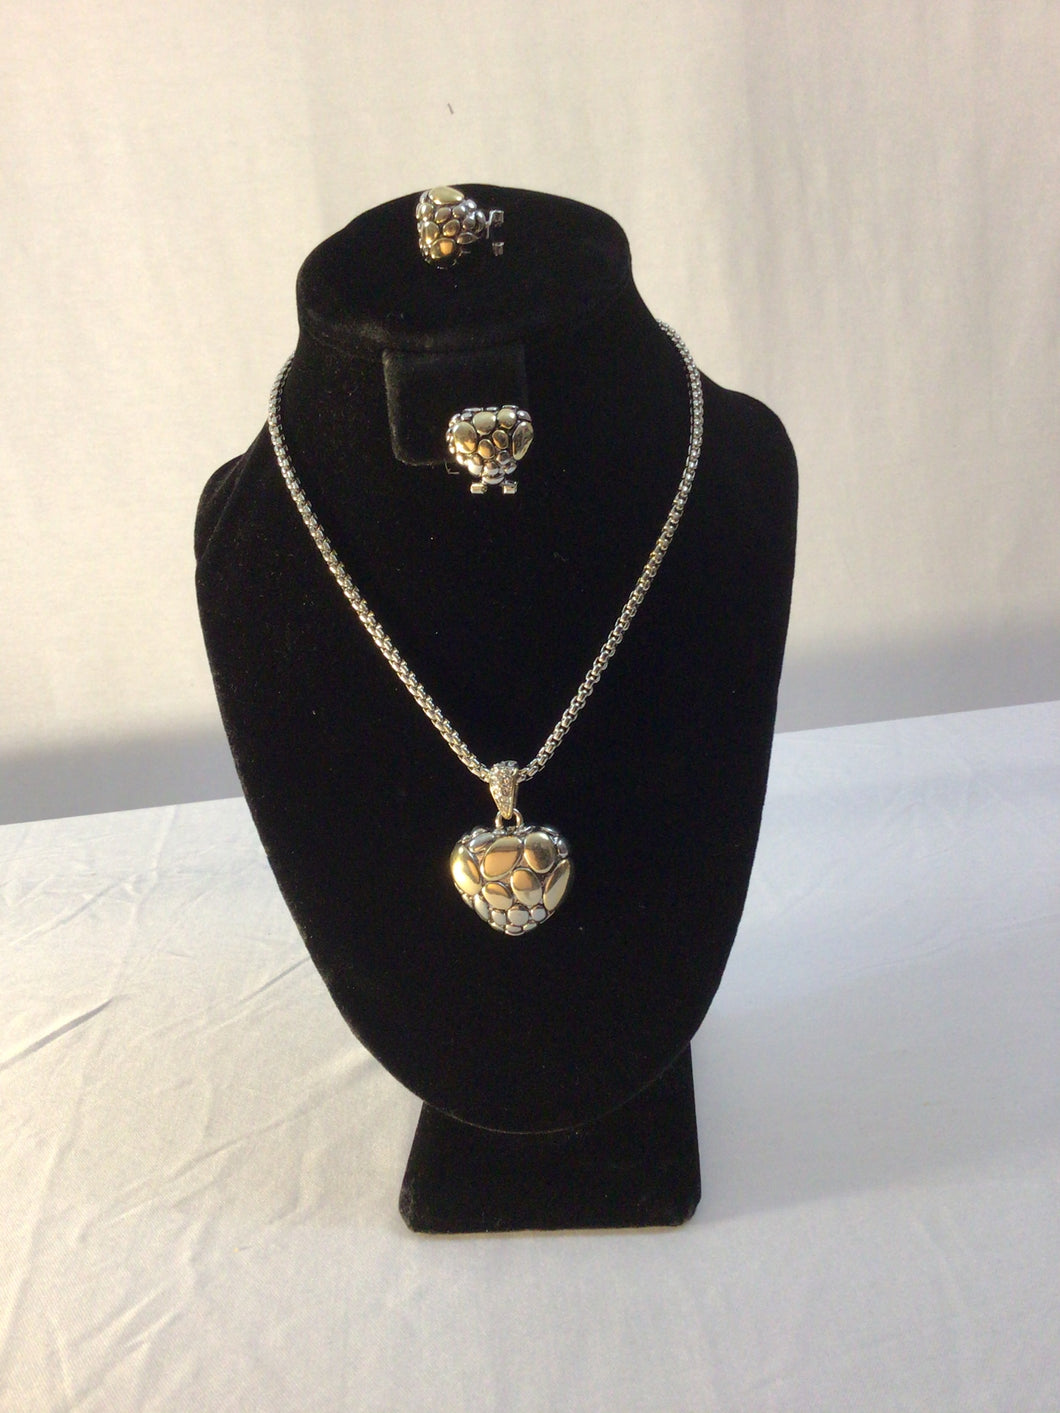 Silver/Gold Toned Heart Necklace Earring Set